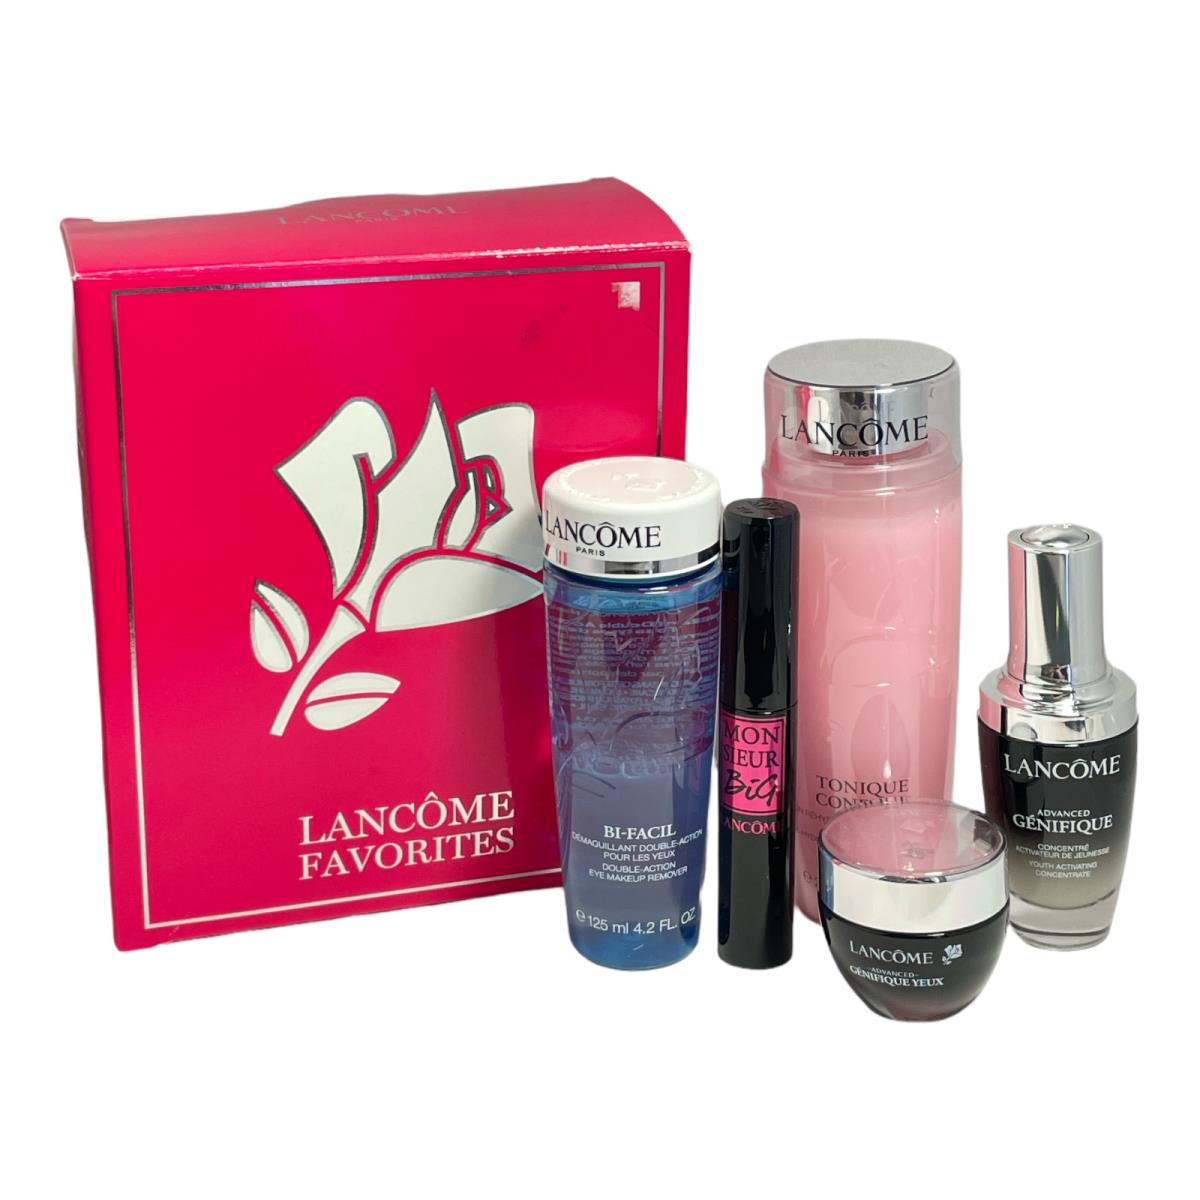 Lancome Favorites Limited-edition Collection Full Size 5 Pieces